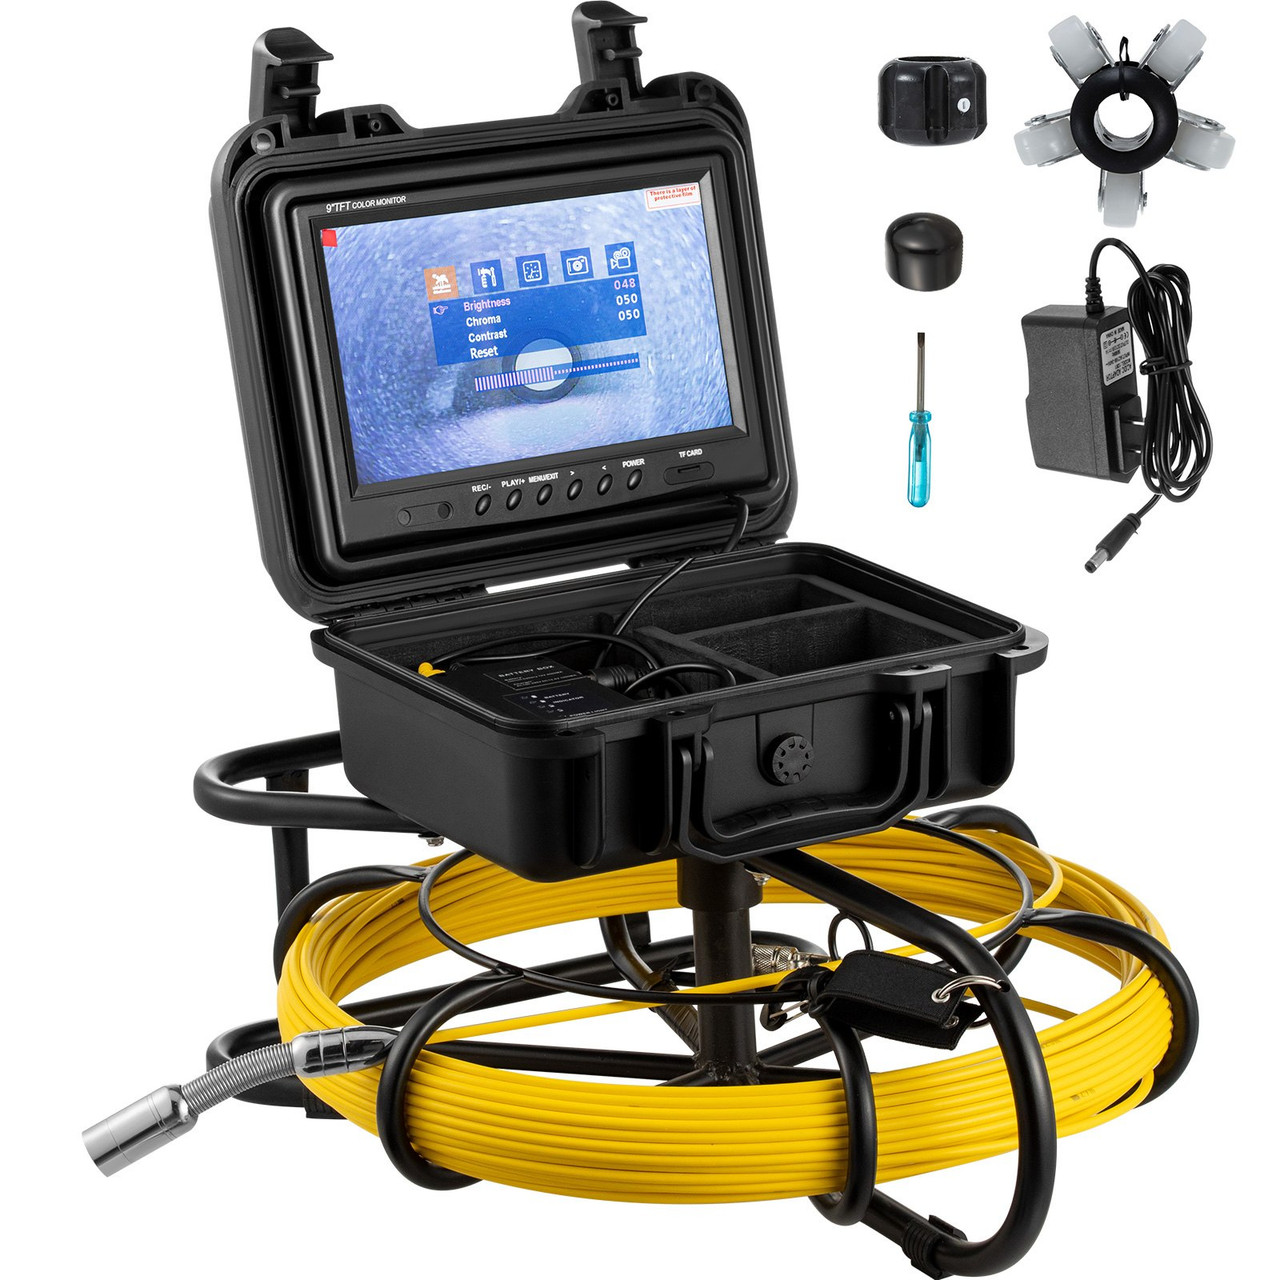 Sewer Camera, 300FT, 9' Screen Pipeline Inspection Camera with DVR Function & 8 GB SD Card, Waterproof IP68 Borescope LED Lights, Industrial Endoscope for Home Wall Duct Drain Pipe Plumbing